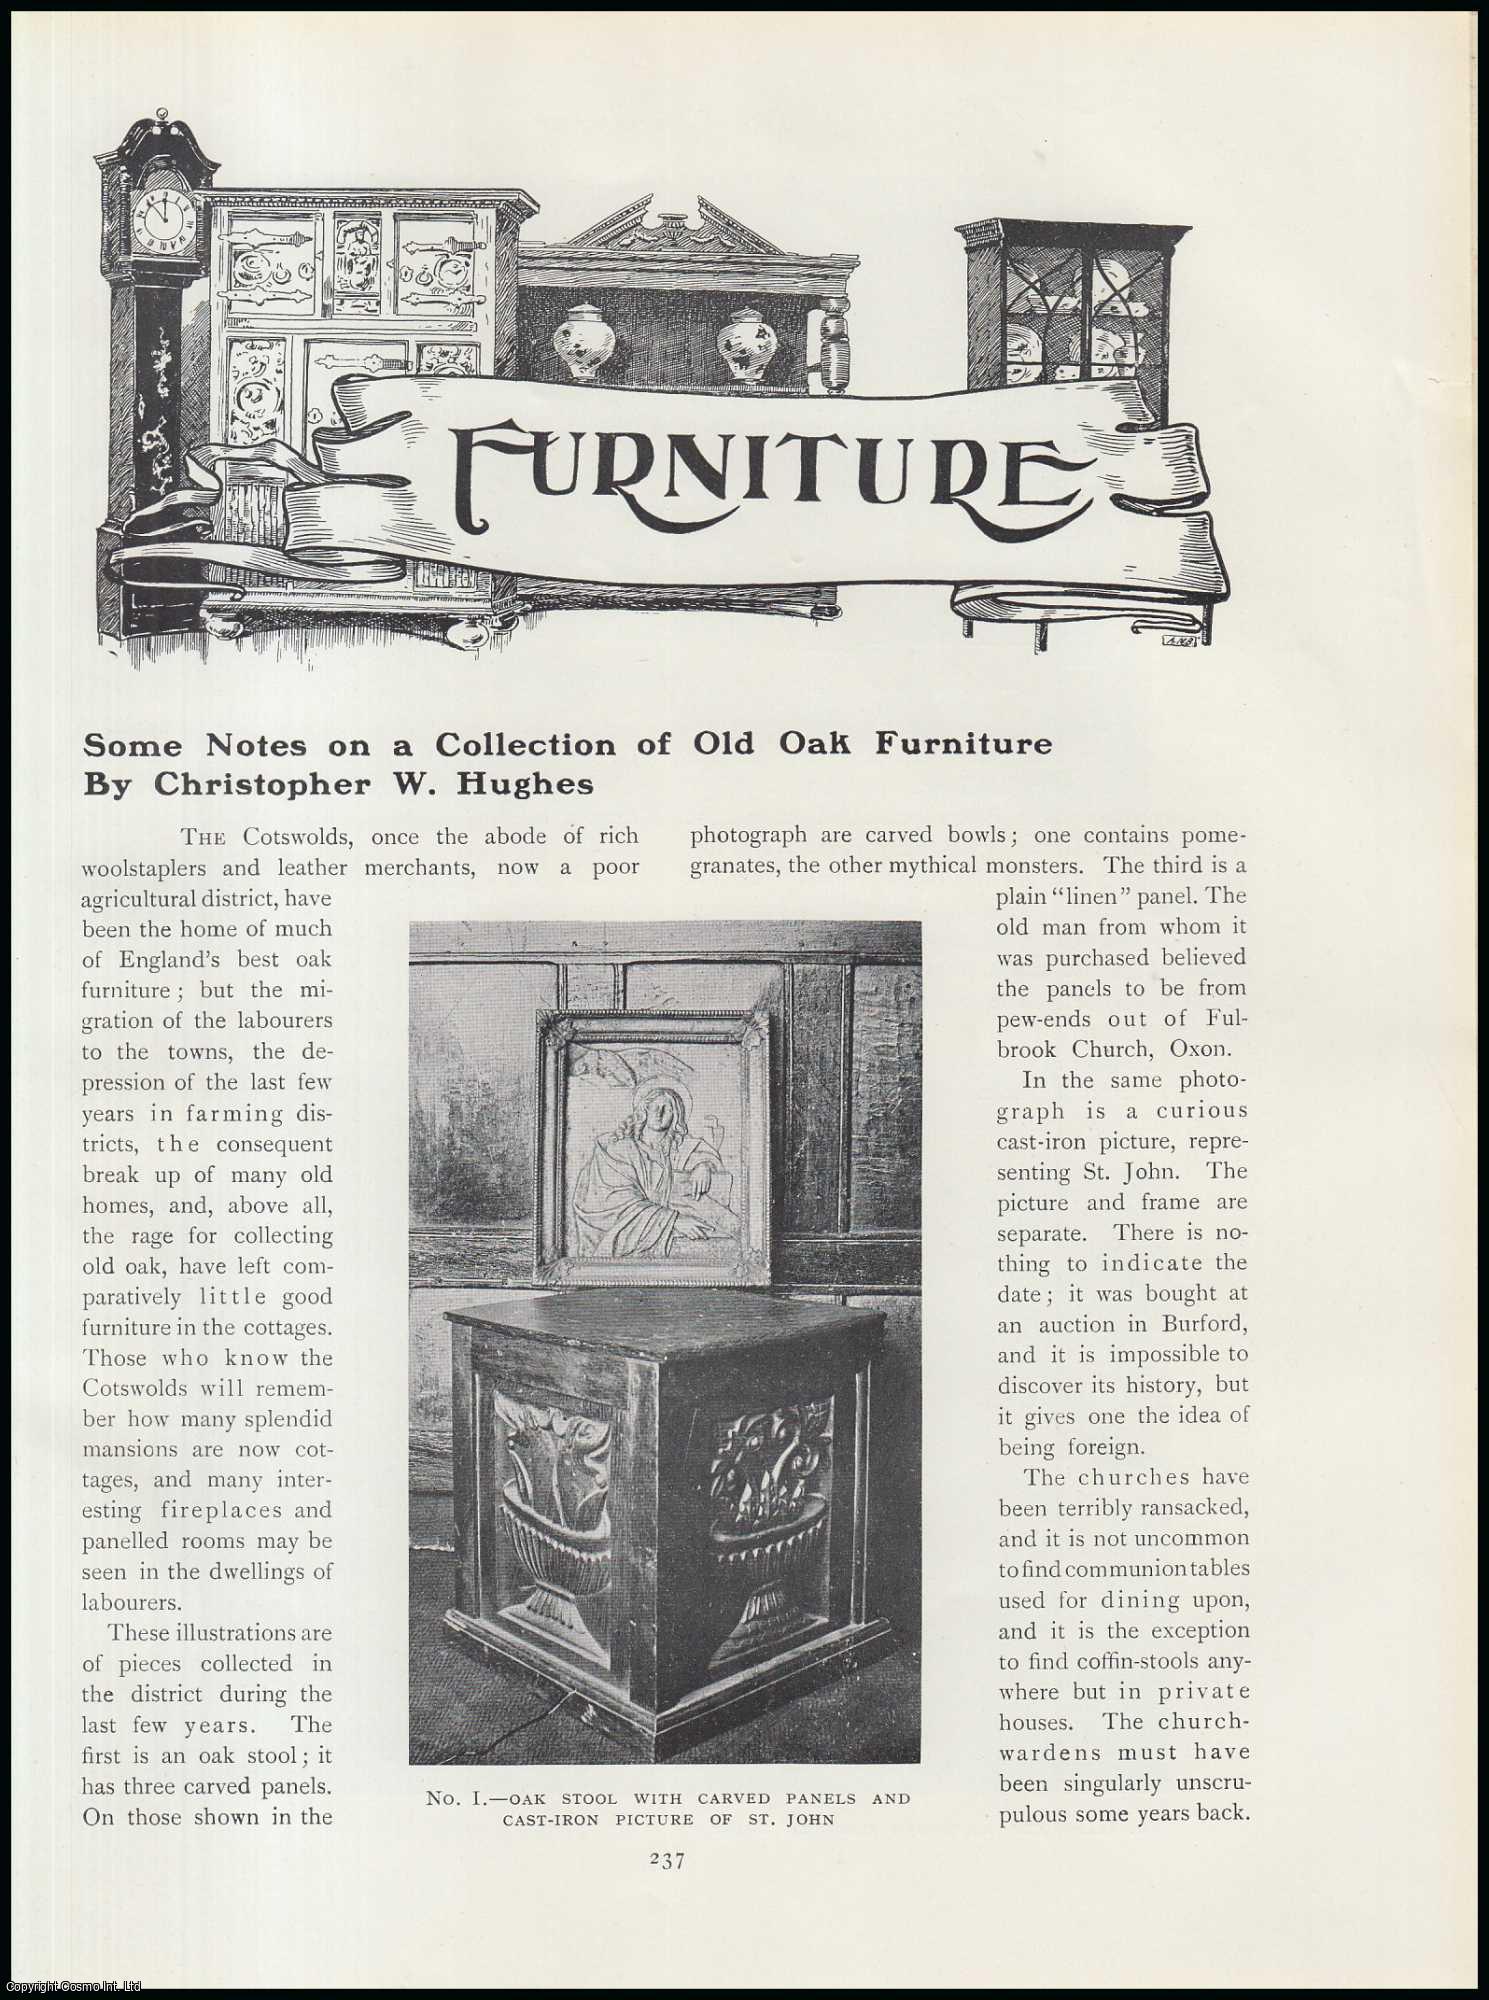 Christopher W. Hughes - A Collection of Old Oak Furniture (The Cotswolds). An original article from The Connoisseur, 1907.